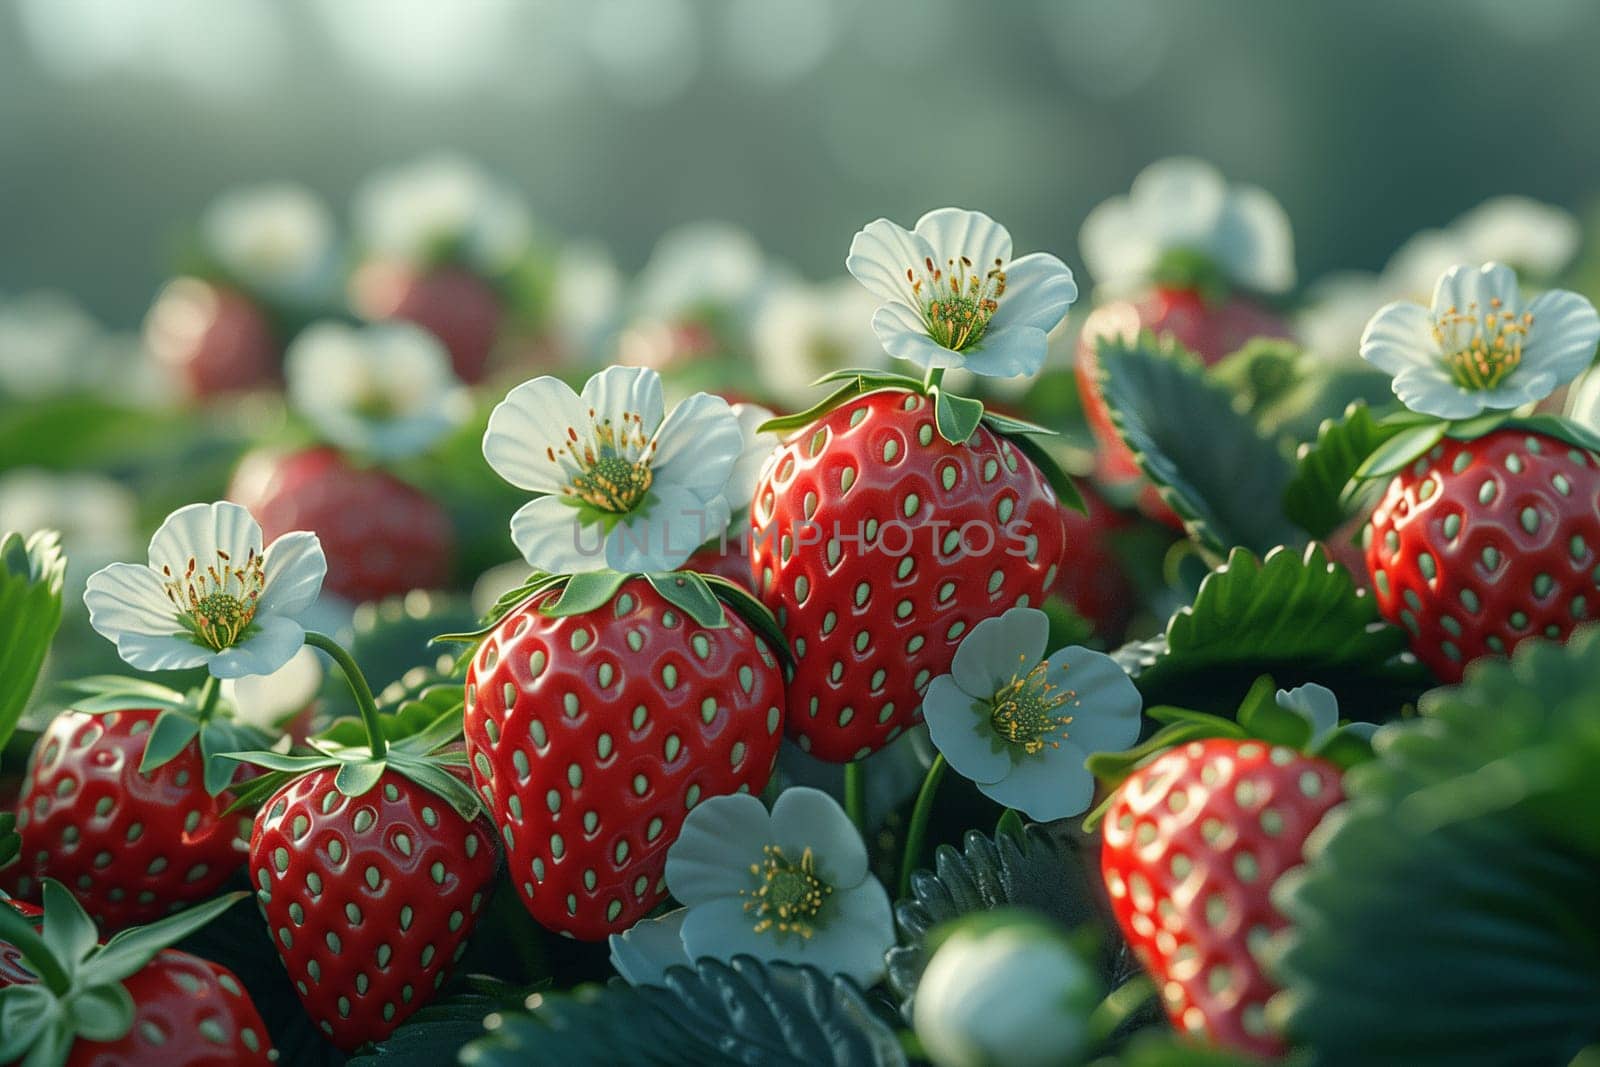 Strawberry Plants Growing in a Field by Sd28DimoN_1976